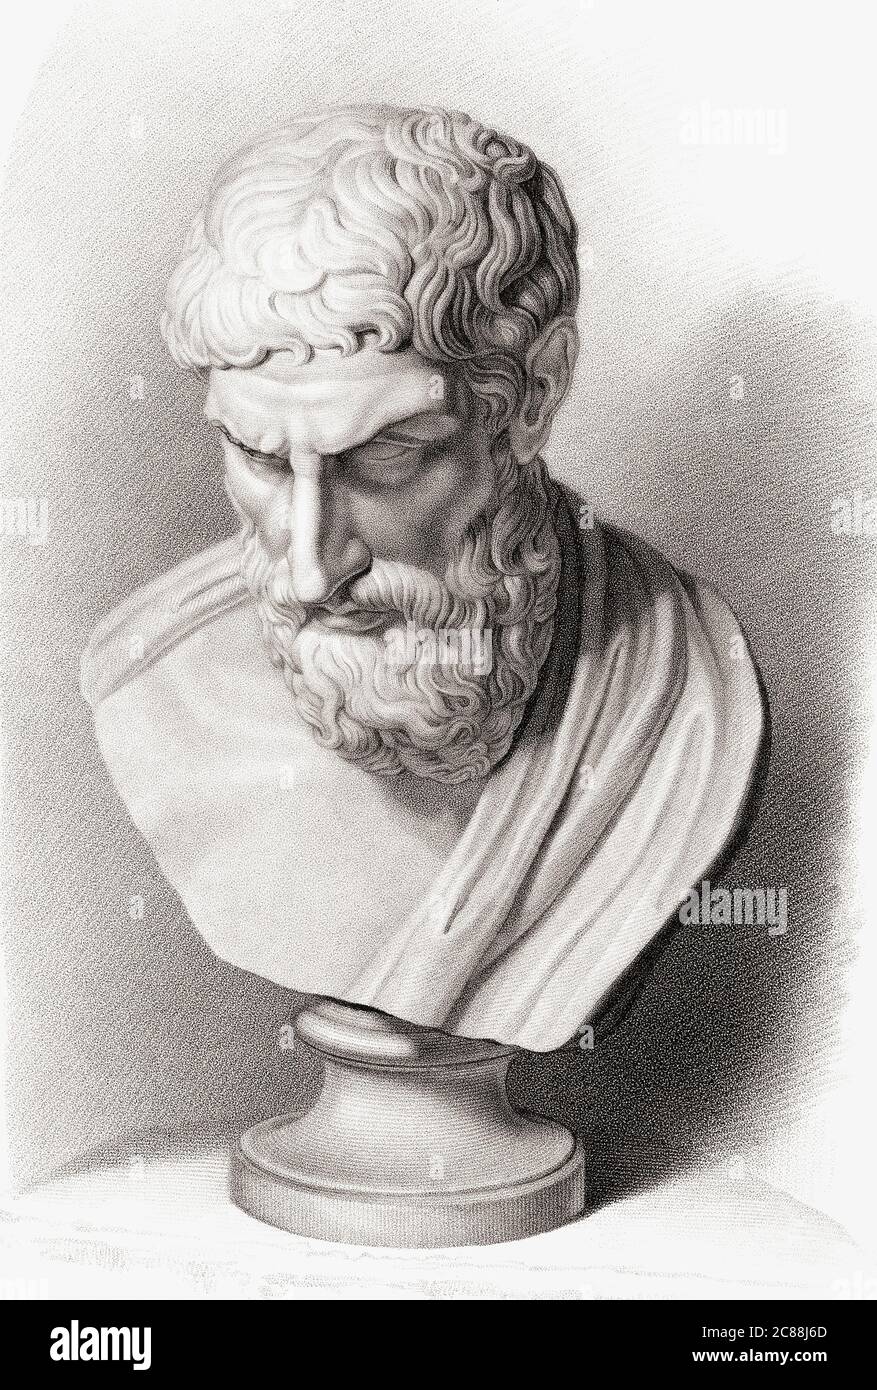 Epicurus, 341–270 BC. Ancient Greek philosopher and founder of the school of philosophy called Epicureanism.  After a work by W.M. Craig from the 3rd century Roman bust in the Museo Archeologico Nazionale in Naples, Italy, which is a copy of a Greek original. Stock Photo